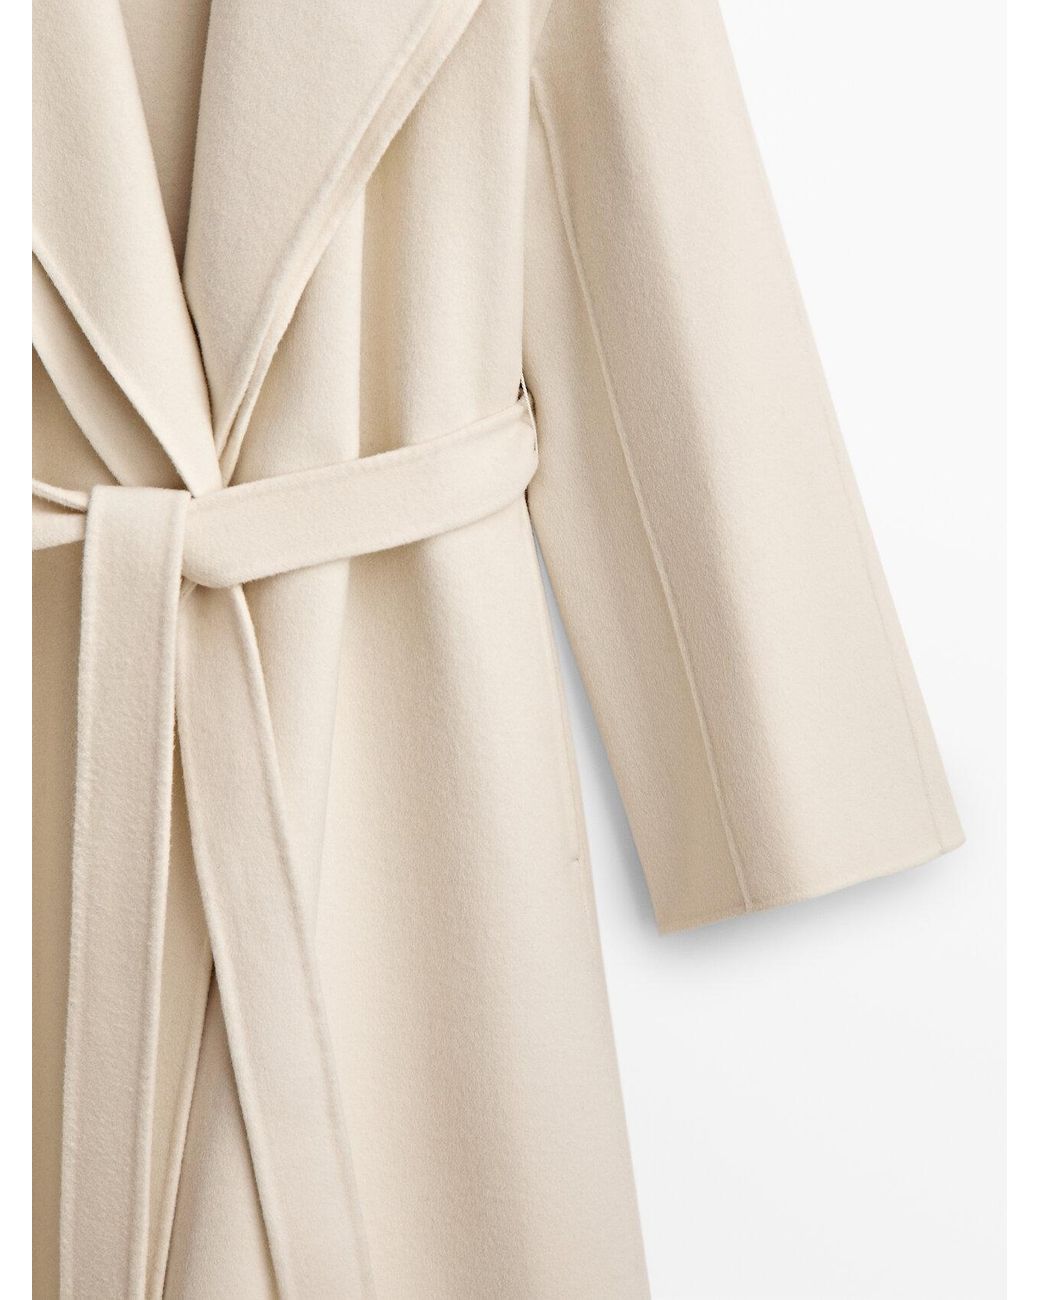 MASSIMO DUTTI Wool Coat With Double Lapels in Natural | Lyst